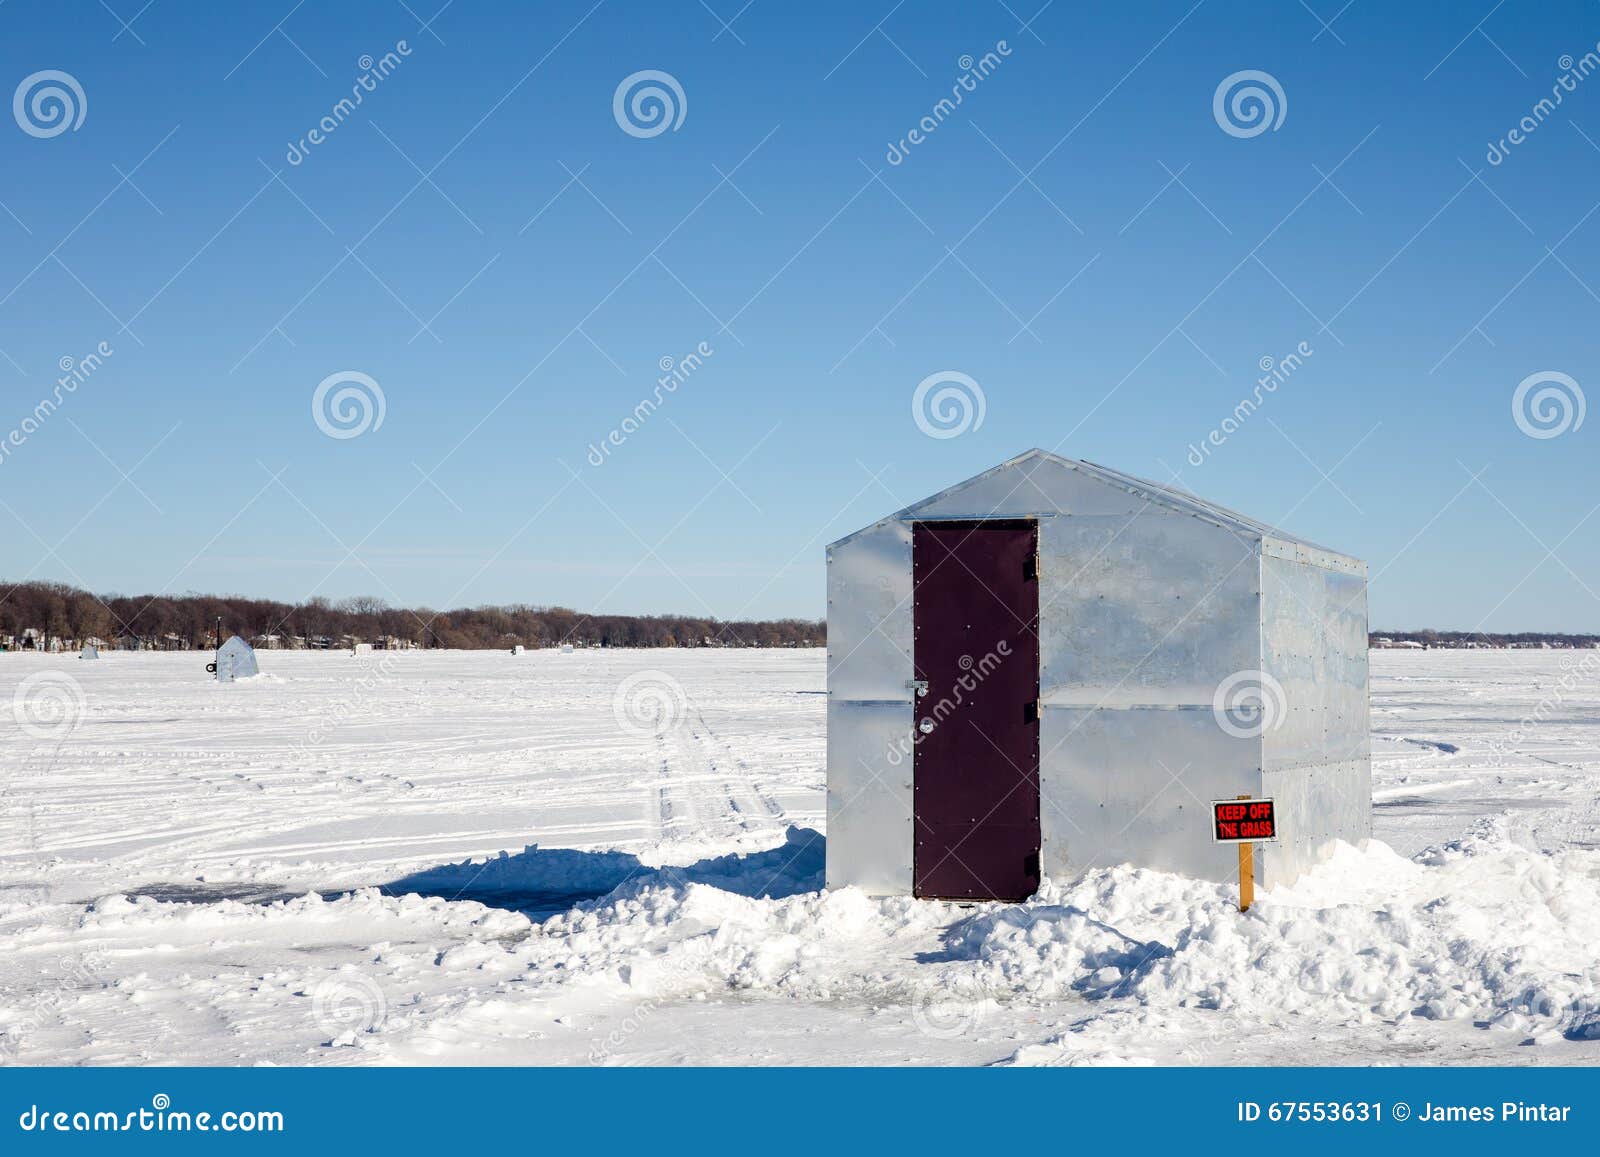 ice shanty with funny sign